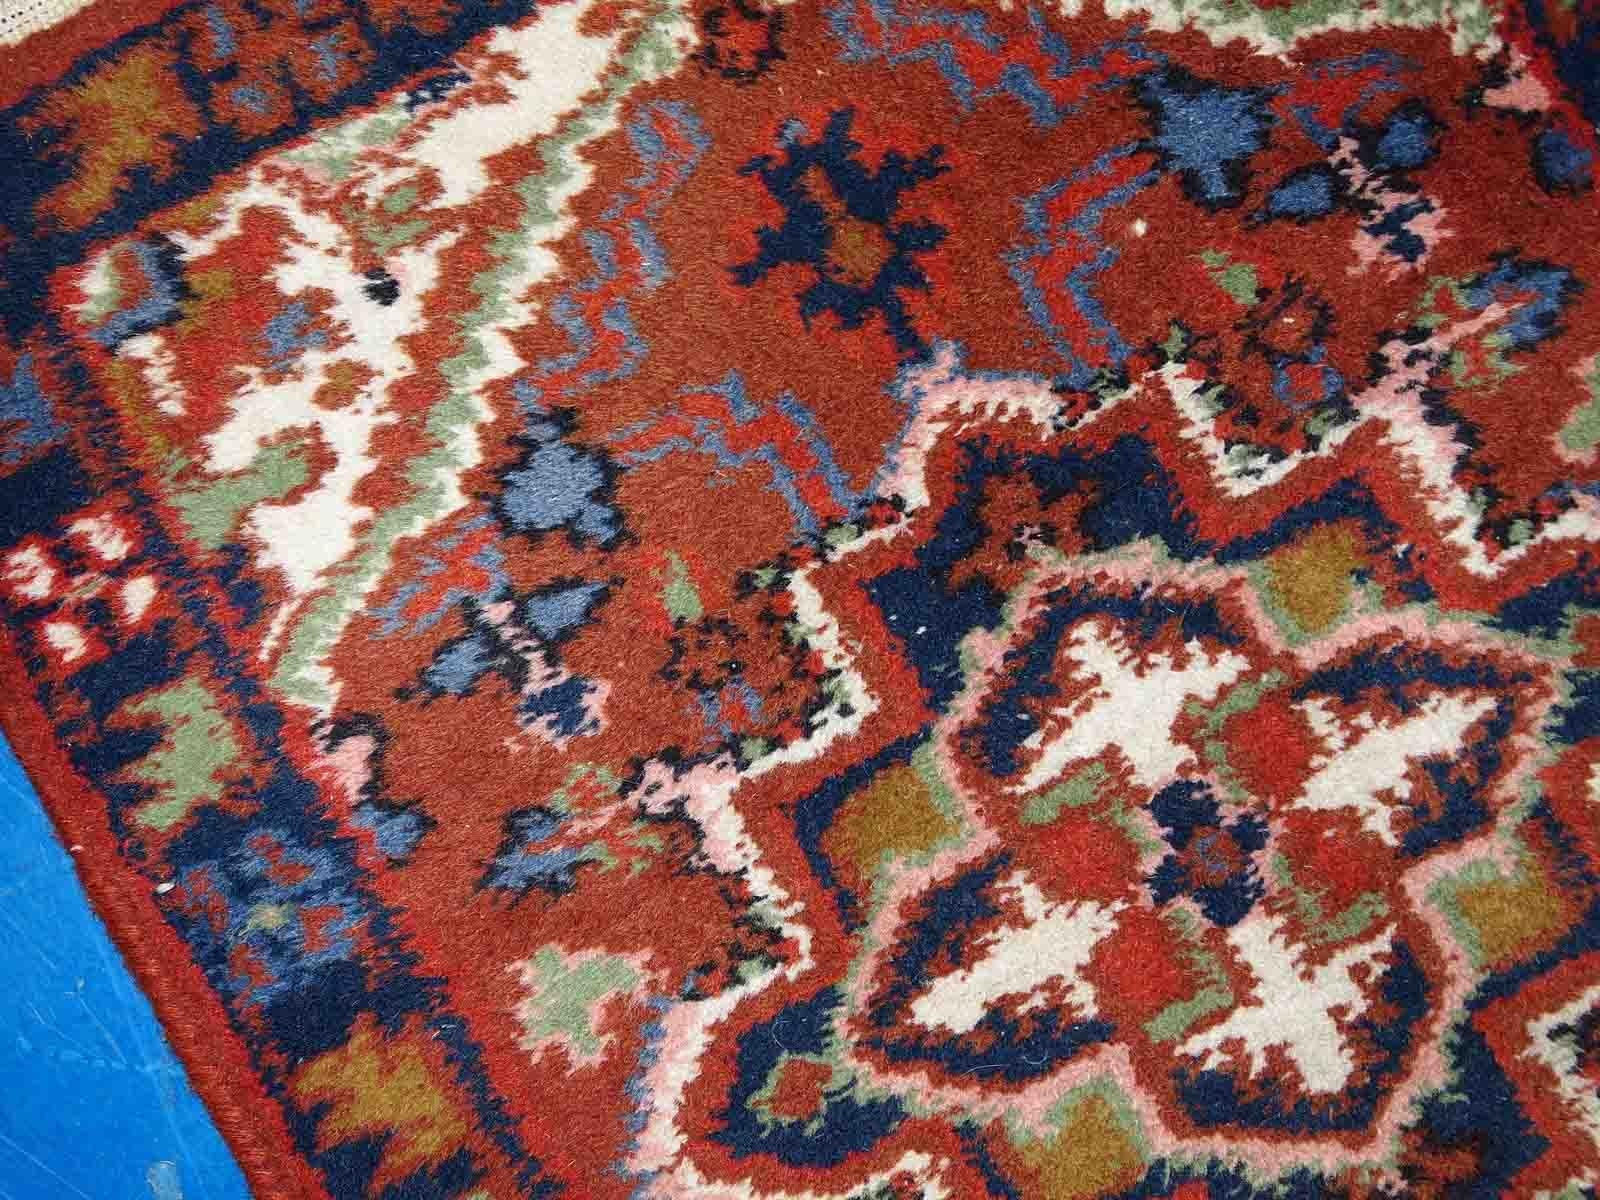 Vintage handmade Middle Eastern Hamadan mat in original good condition. The rug is from the end of 20th century in brick red colour.

-condition: original good,
?
-circa: 1970s,

-size: 1.6' x 2.3' (50cm x 70cm),

-material: